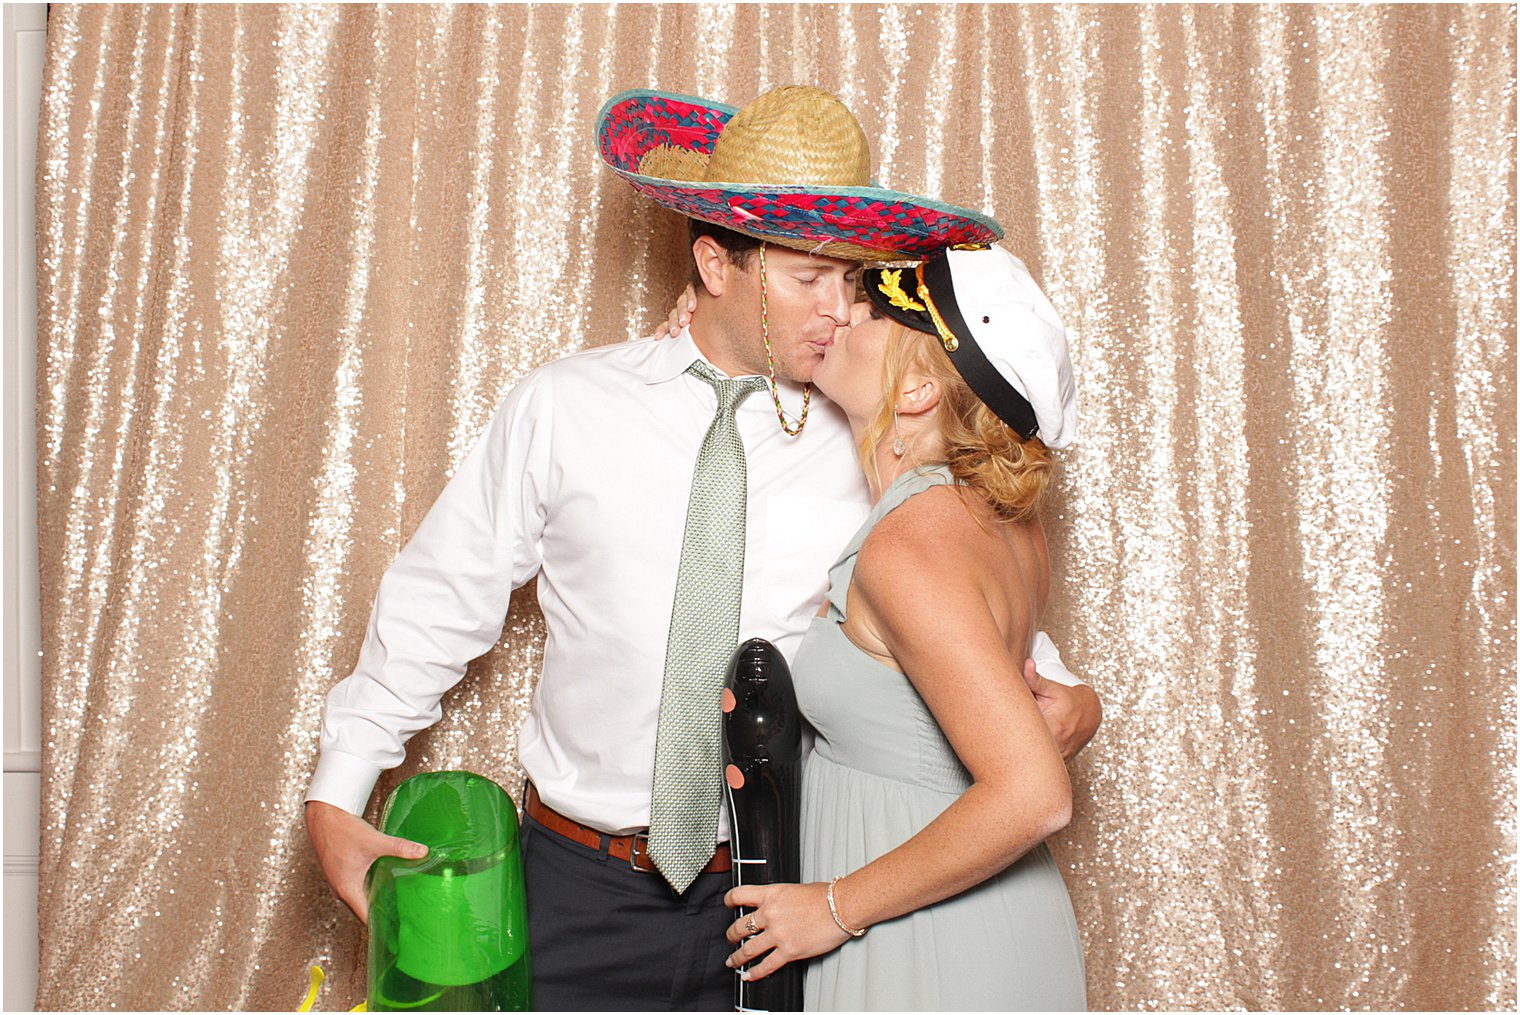 wedding guests kiss in photo booth